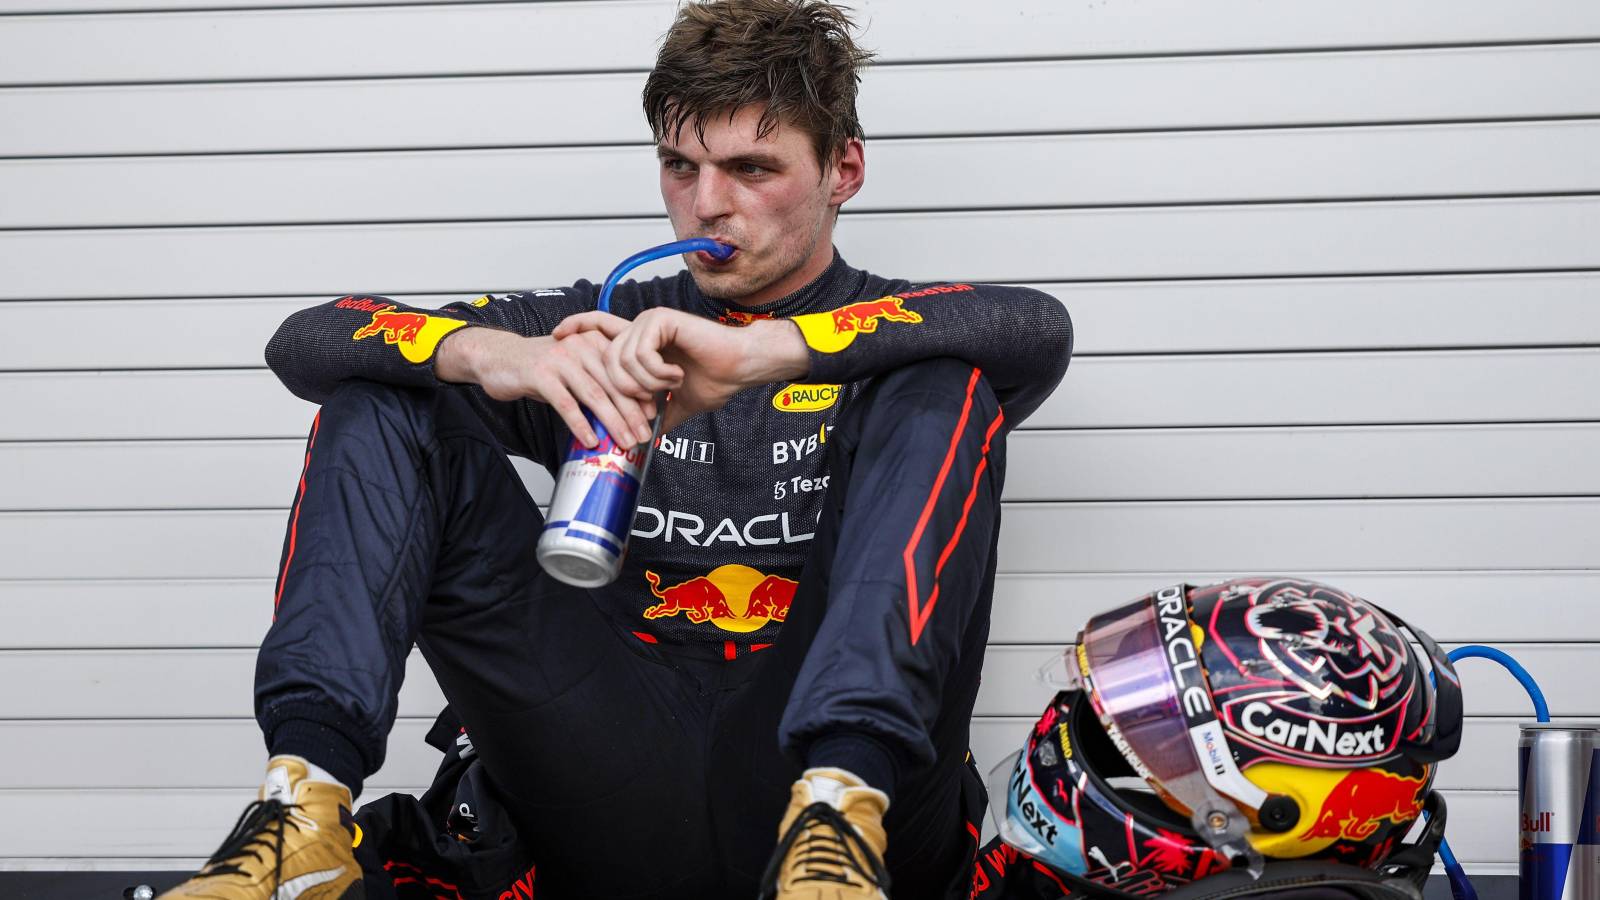 Max Verstappen, Red Bull, has a post-race drink in Miami.